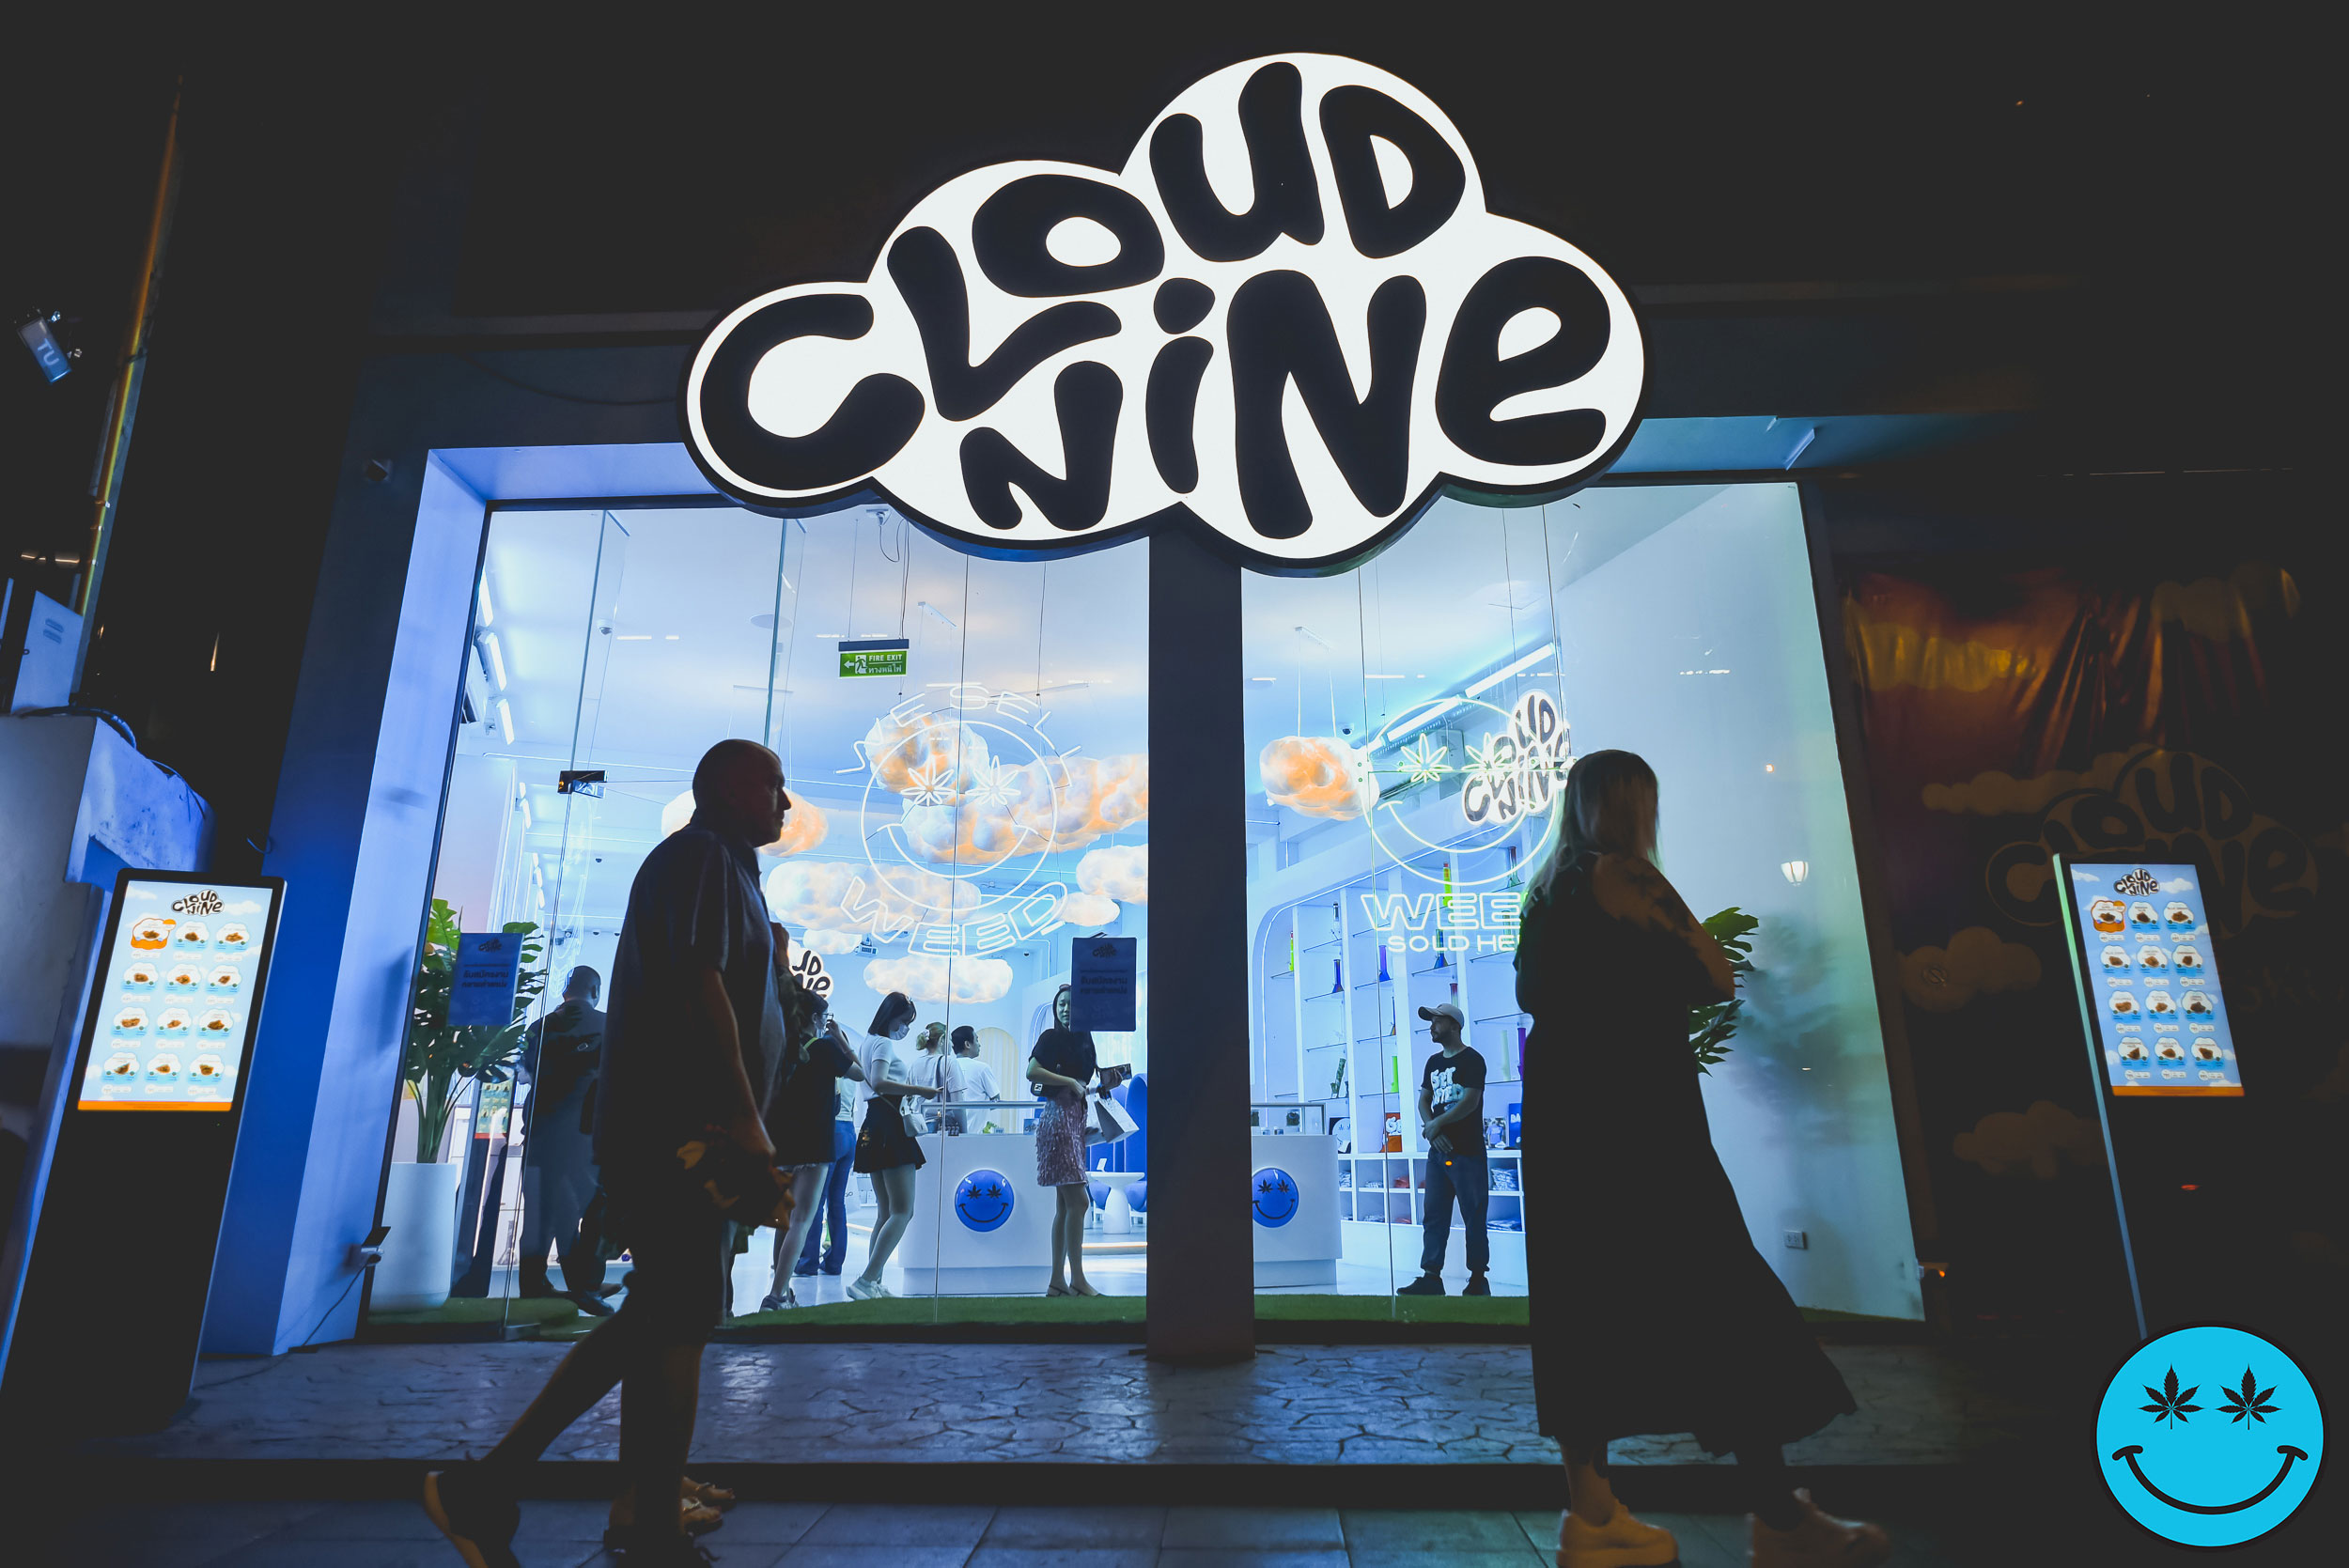 Cloud Nine Celebrates their “GET LIFTED” Grand Opening Wednesday